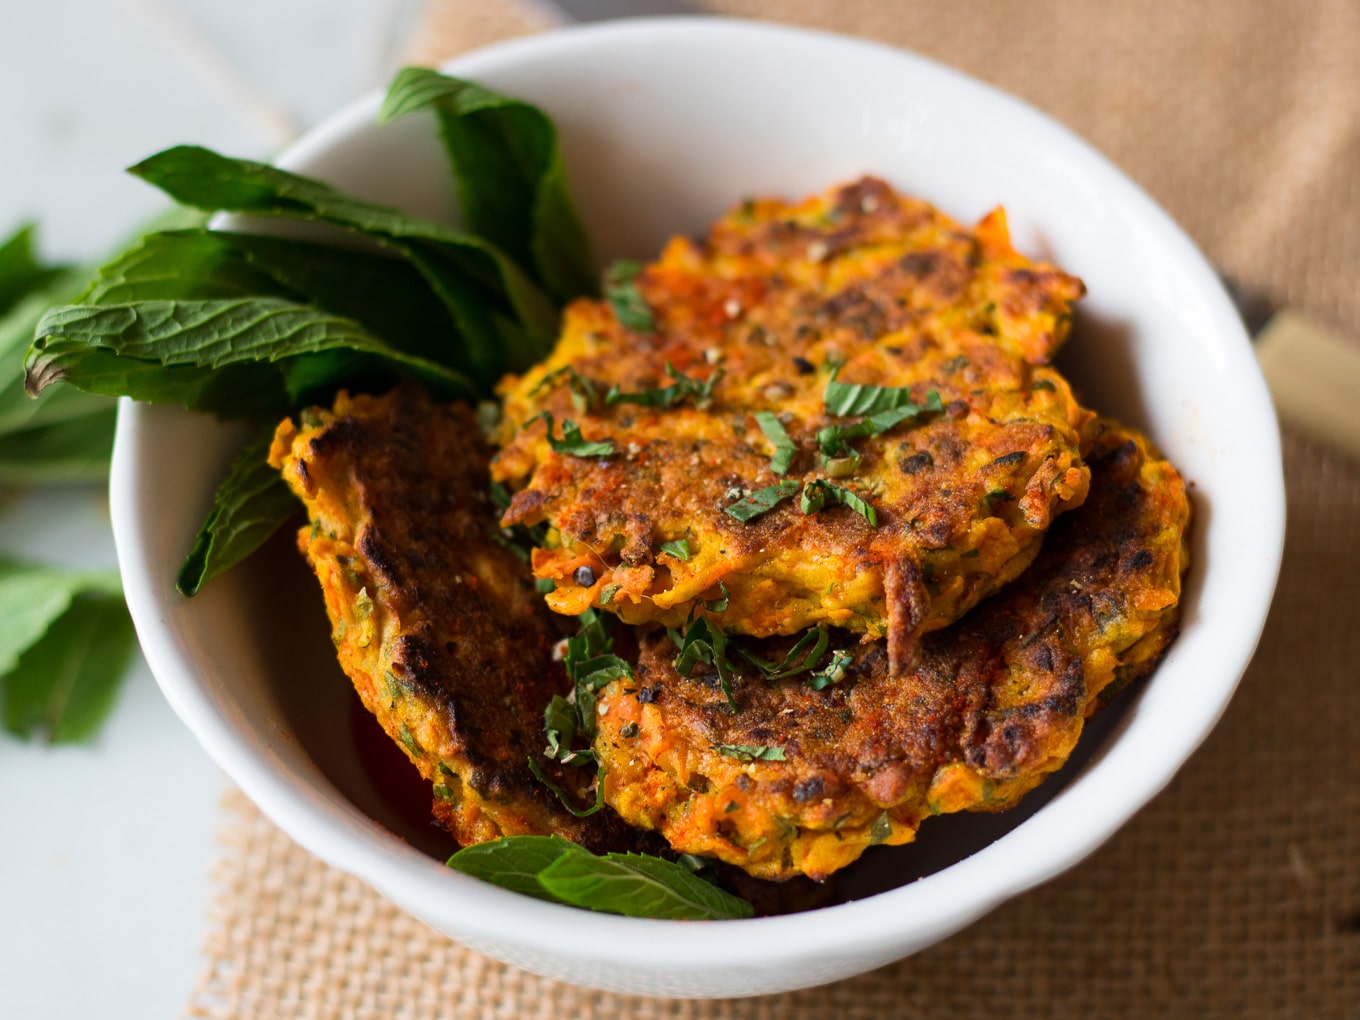 Healthy Carrot Fritters made with grated carrot, buckwheat flour, egg and a little seasoning, too easy.